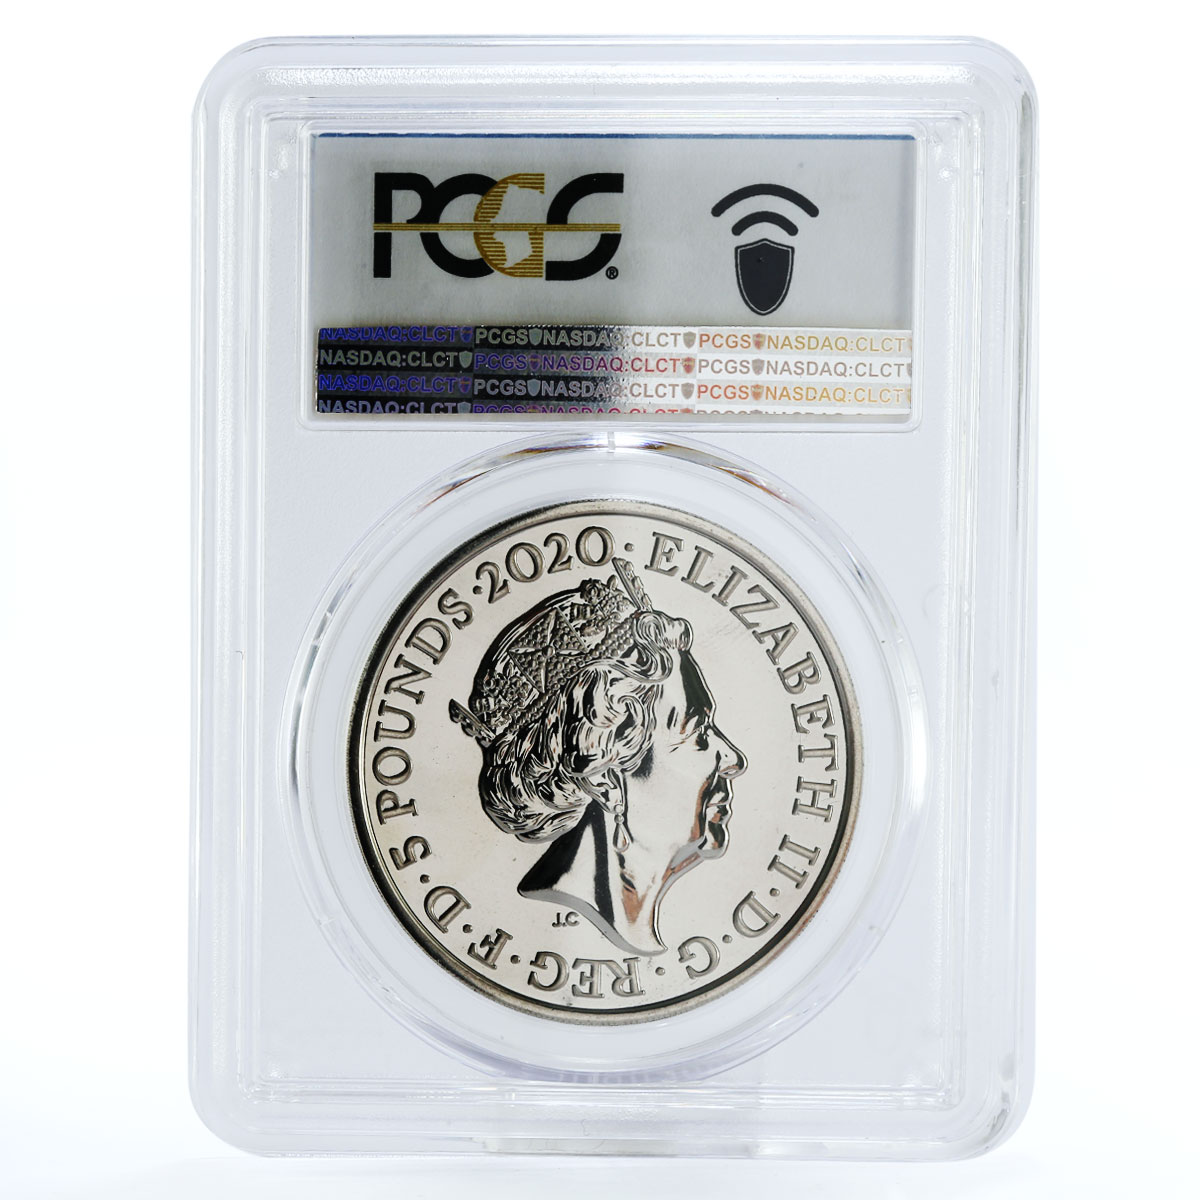 Britain 5 pounds Bondiana series Pay Attention 007 MS69 PCGS CuNi coin 2020